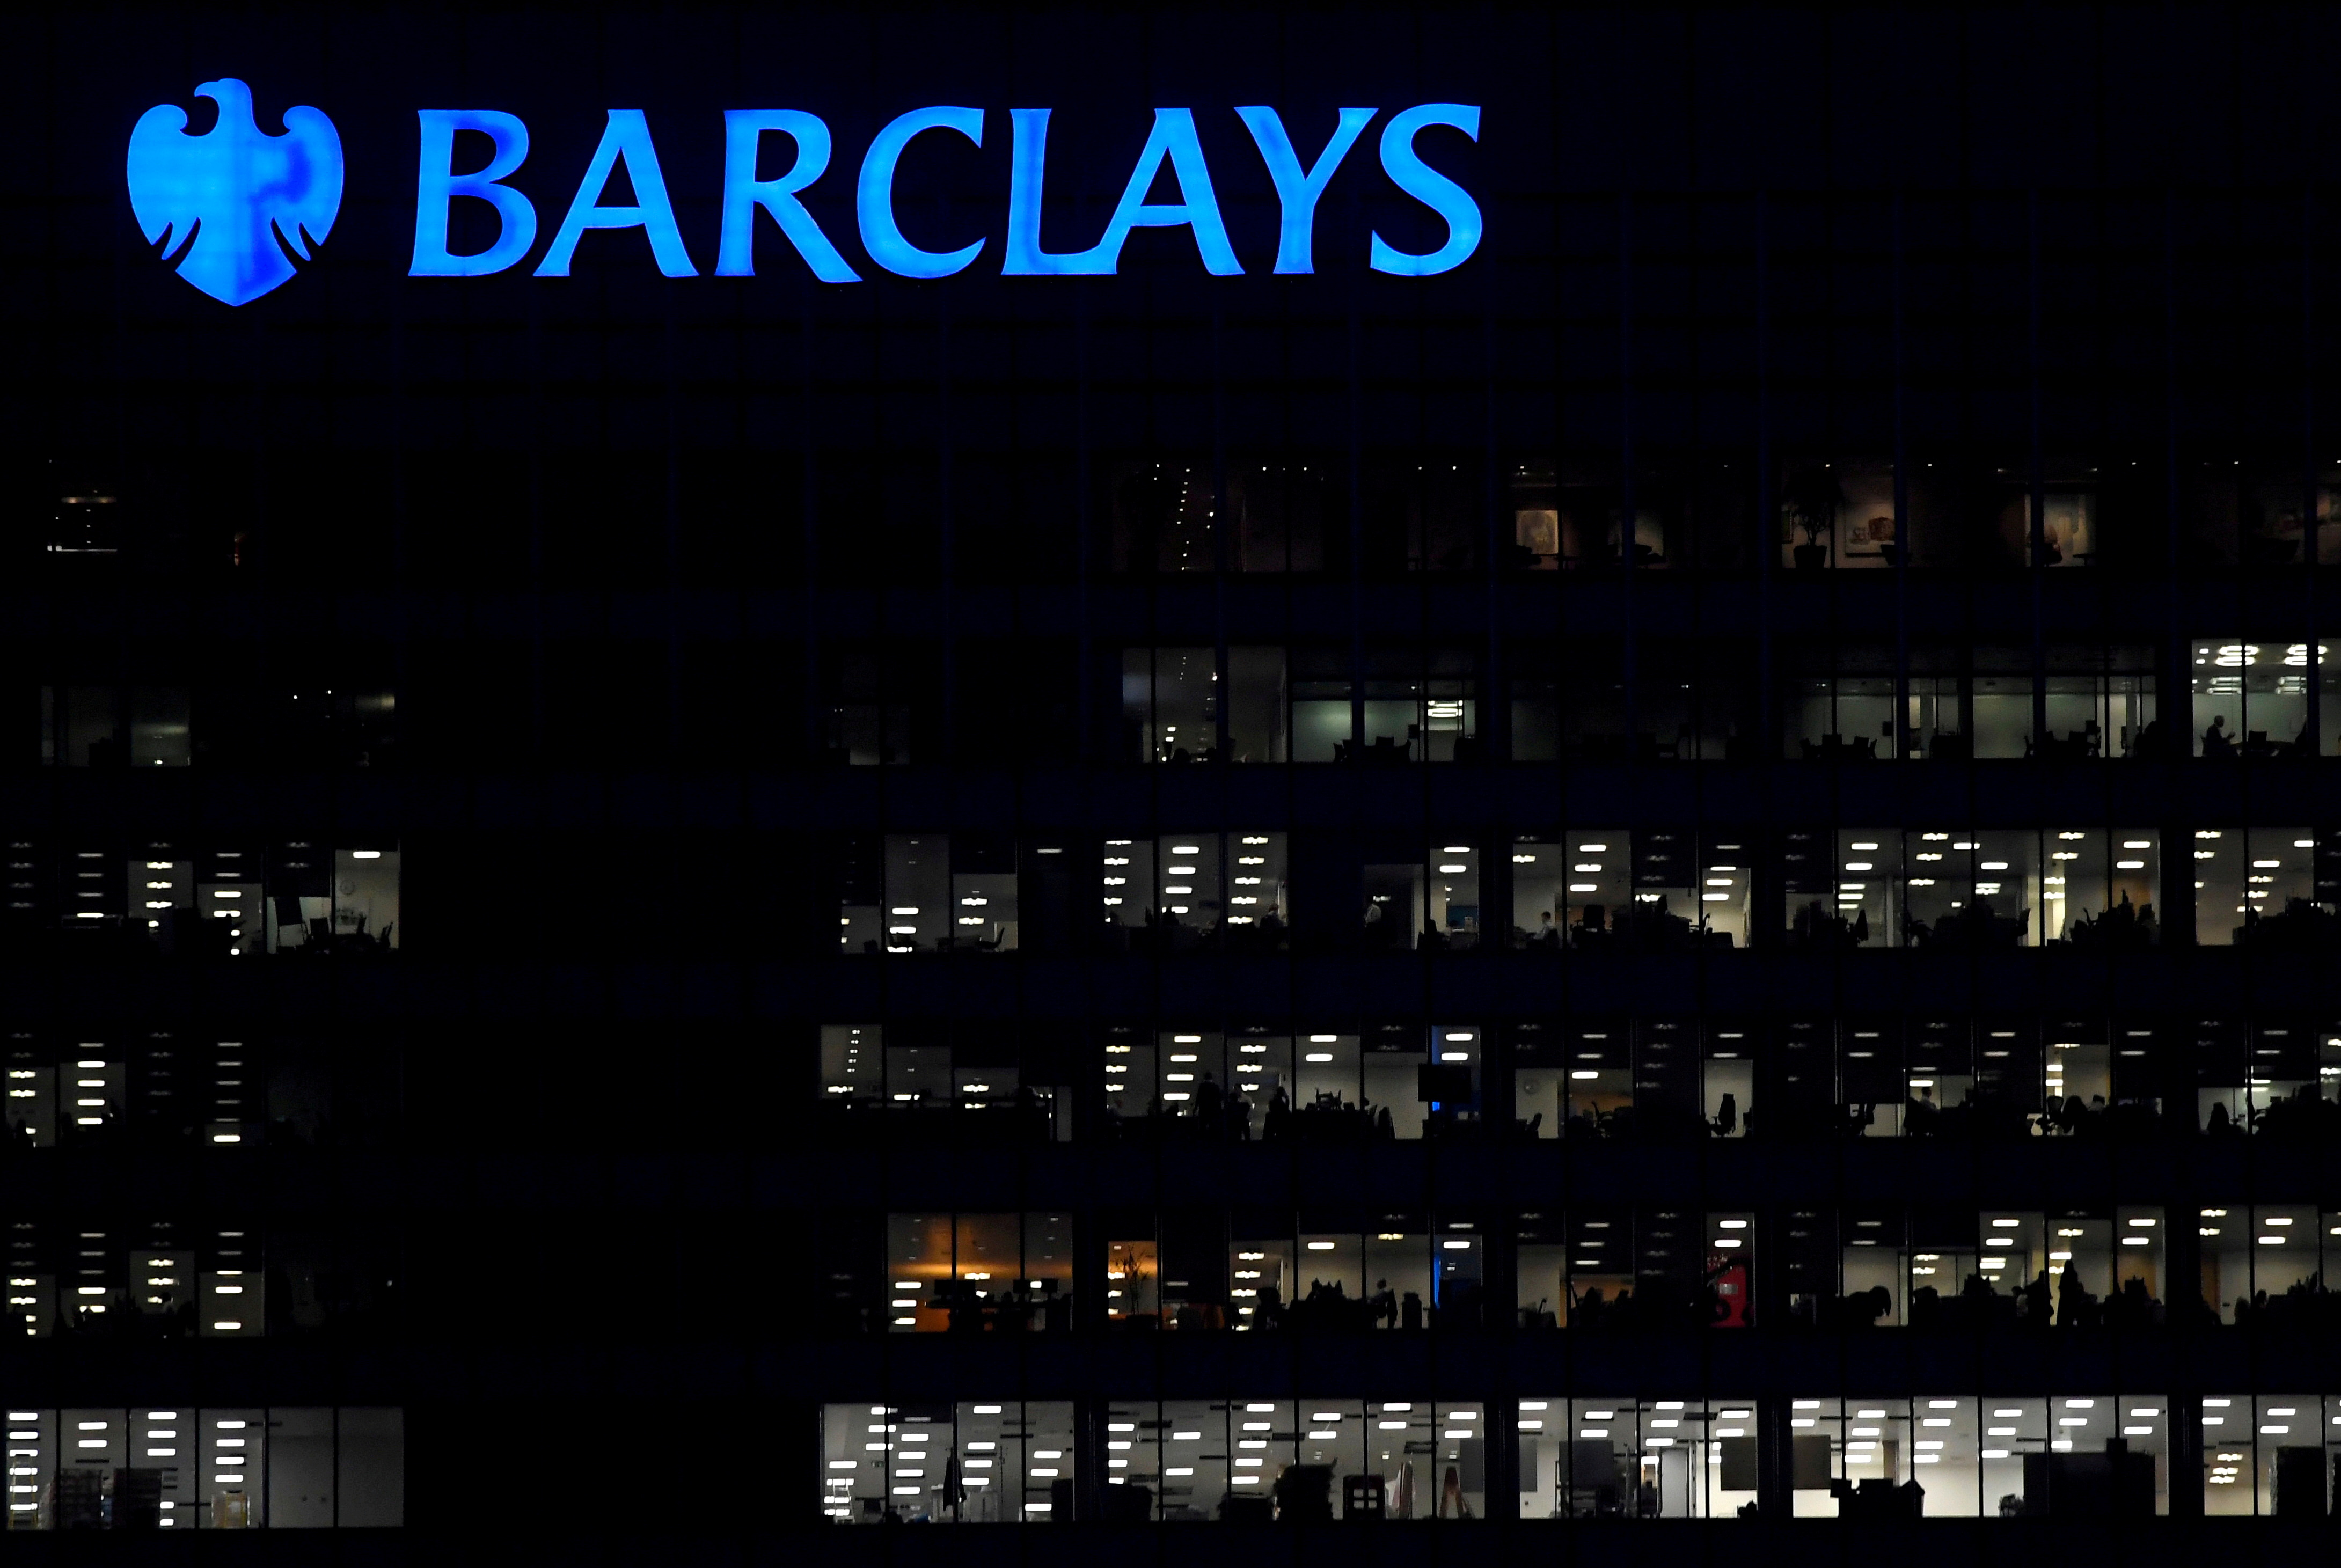 Barclays pays out more than 1 bln to investors as profits rebound